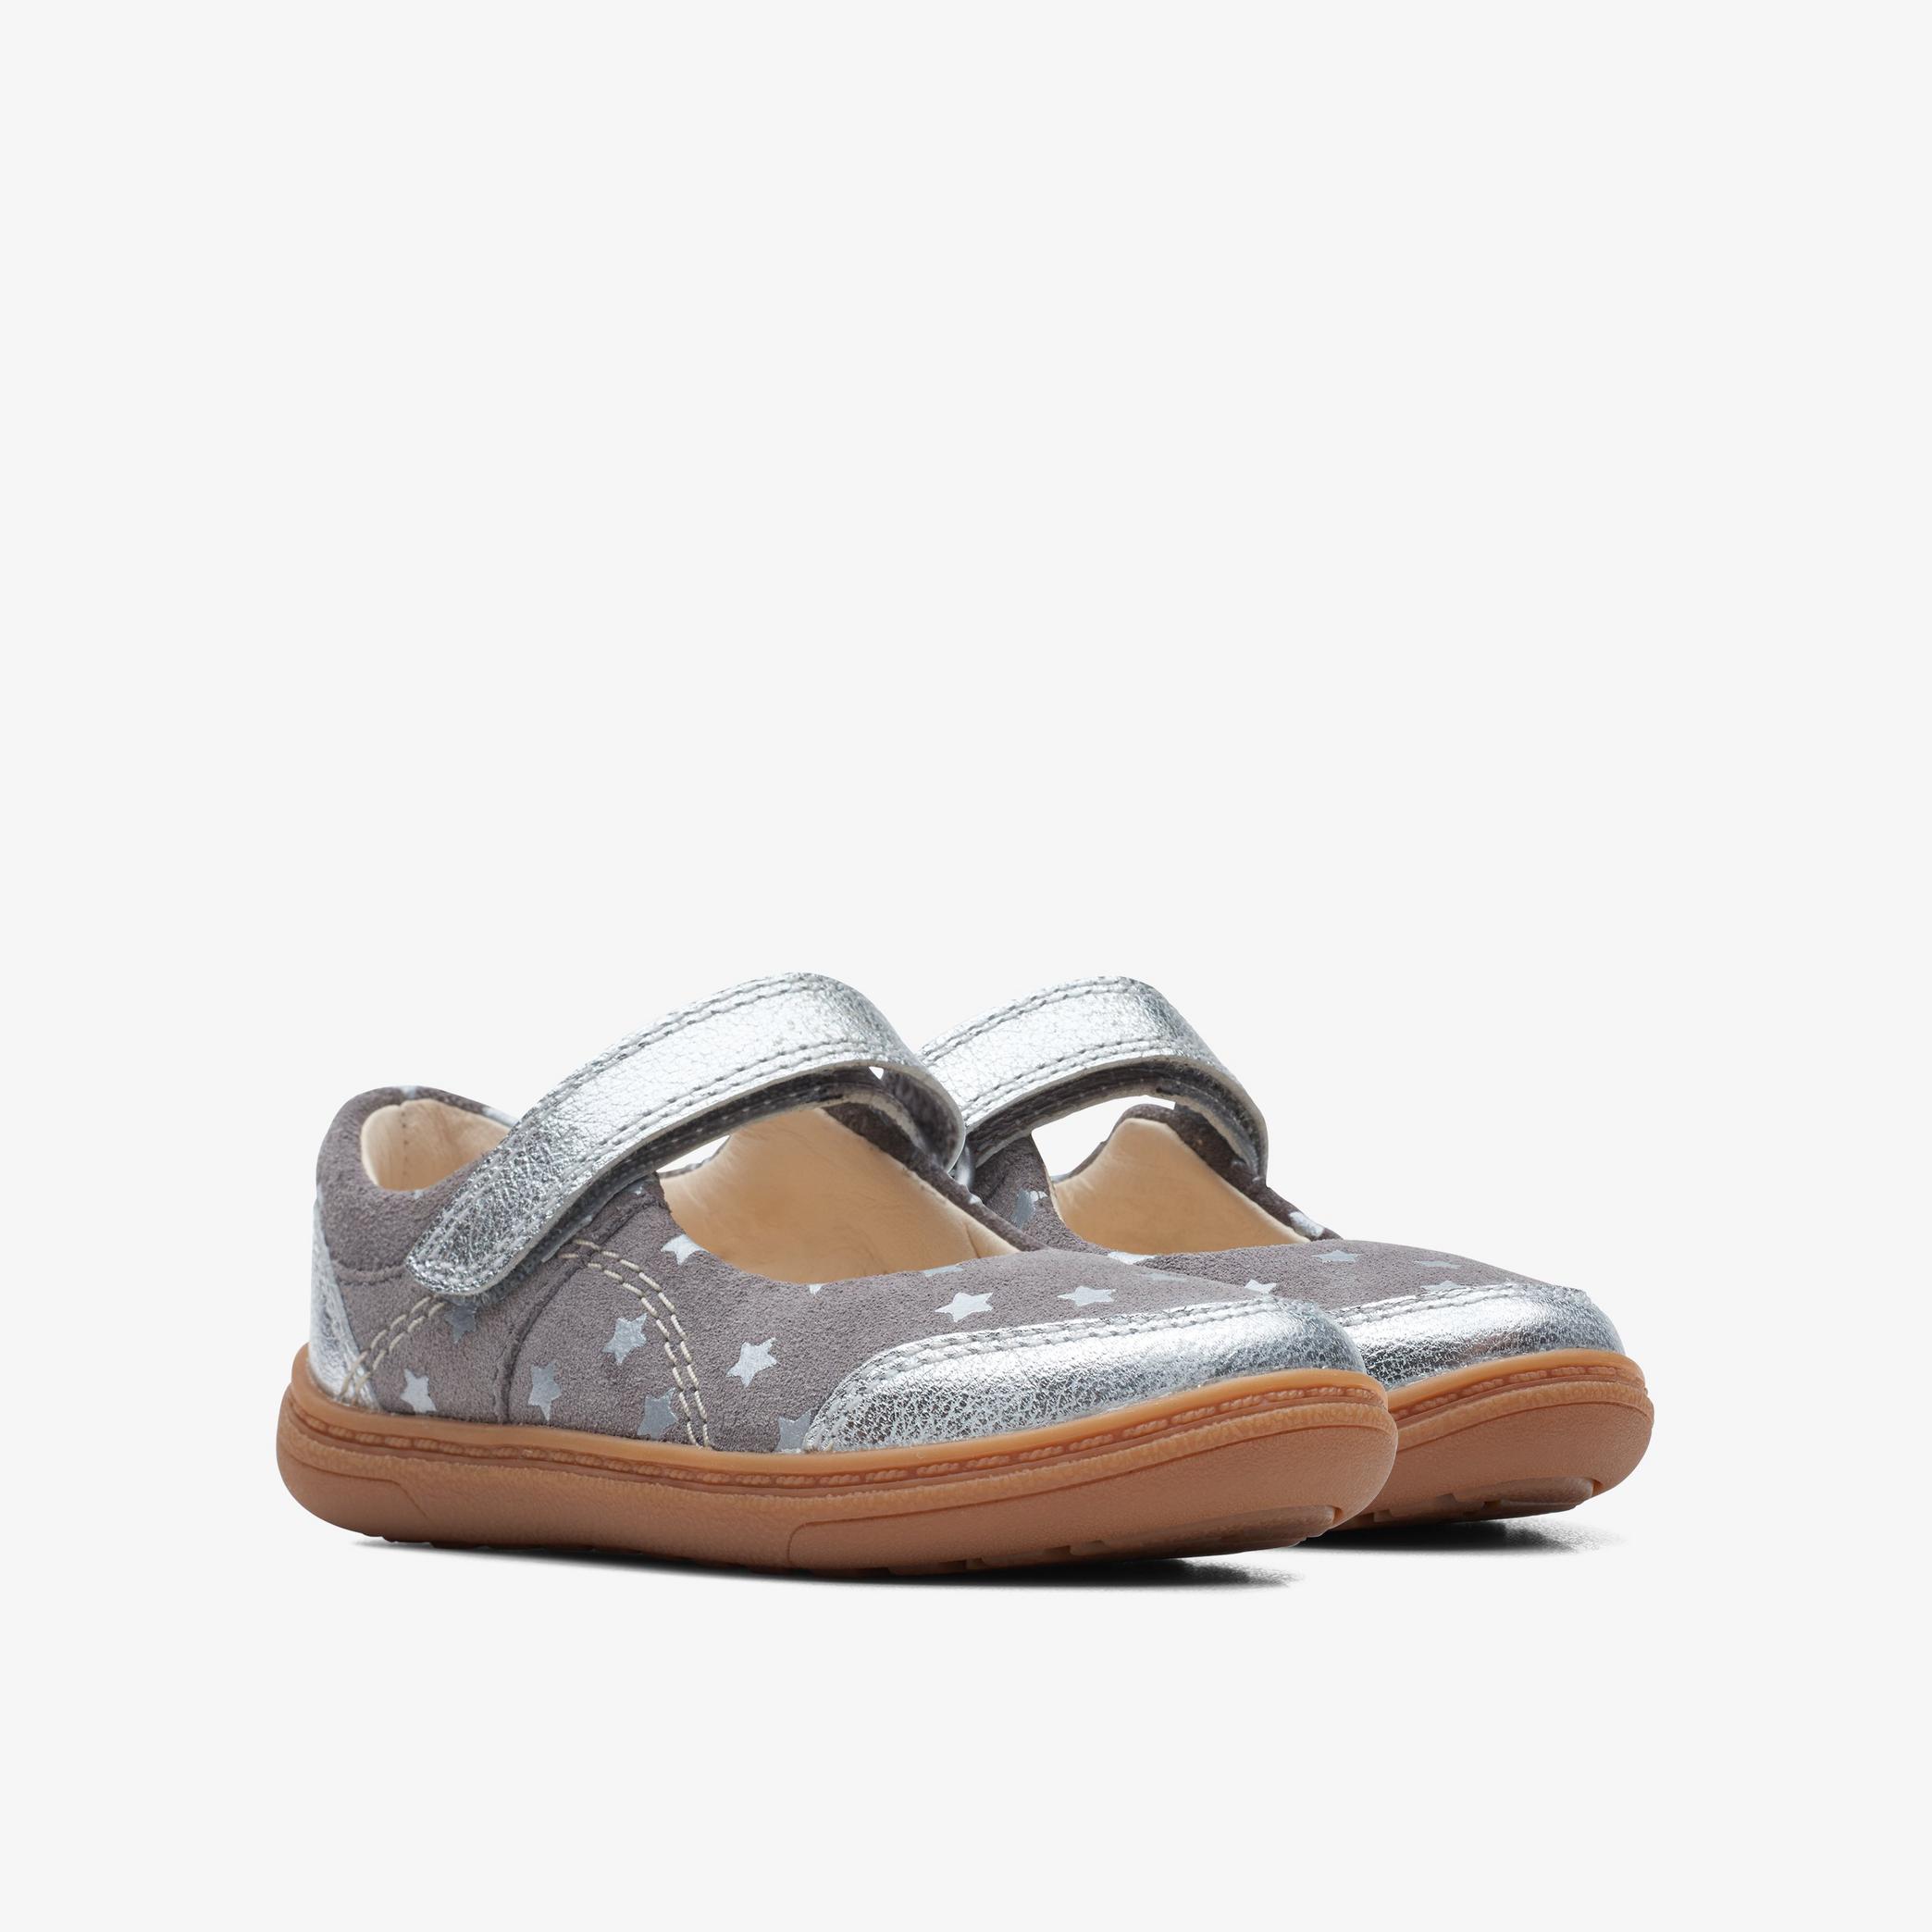 FlashBright Toddler Gun Metal Mary Jane Shoes, view 4 of 6